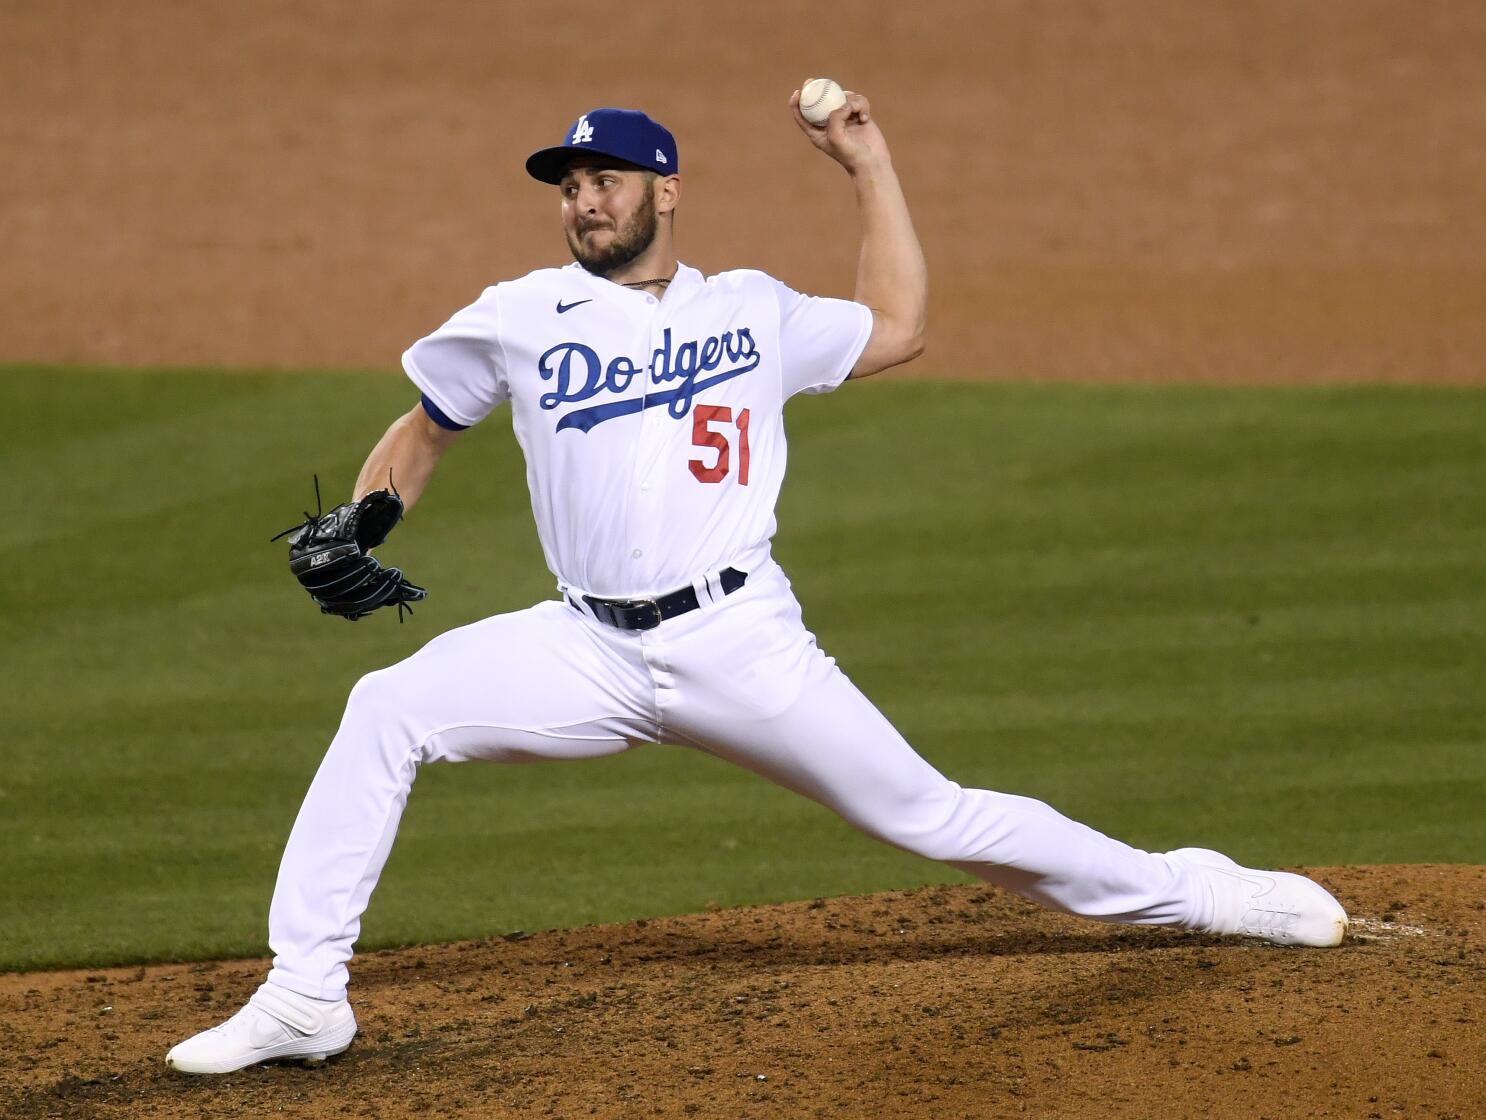 LOS ANGELES, CA - MAY 29: Los Angeles Dodgers relief pitcher